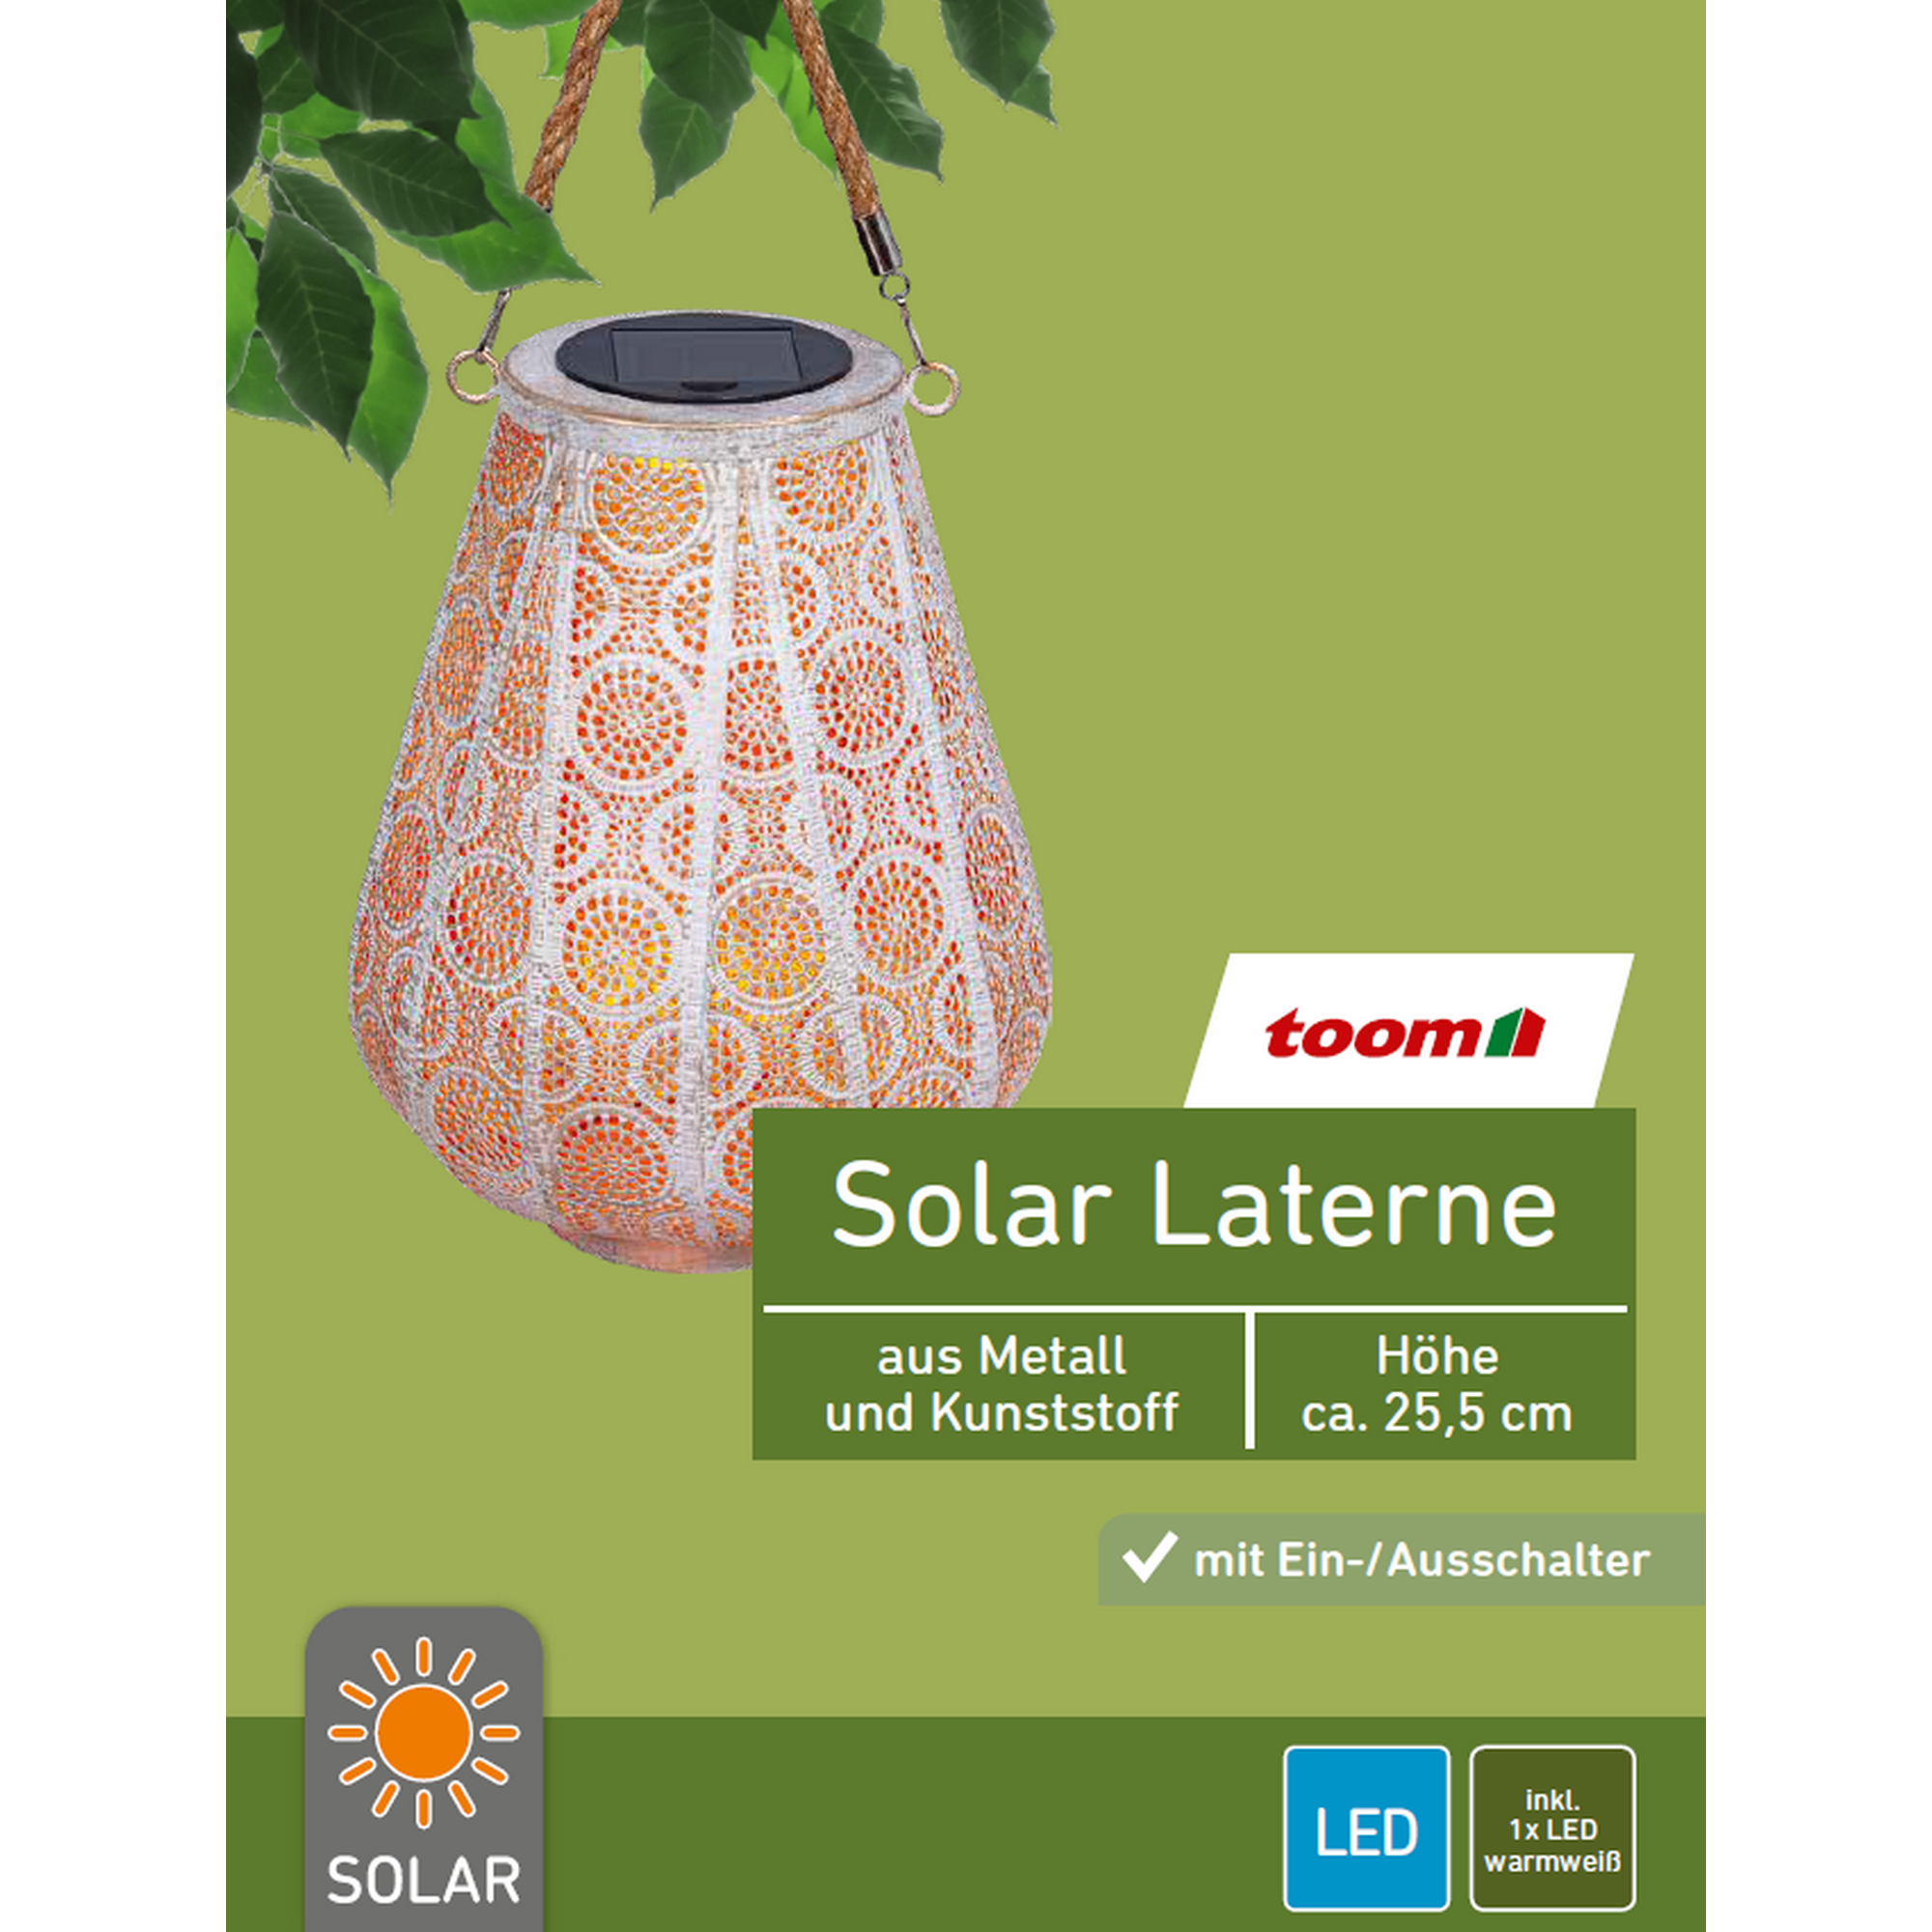 Solar-Laterne 'Oriental' weiß/gold Ø 20 x 40,5 cm + product picture